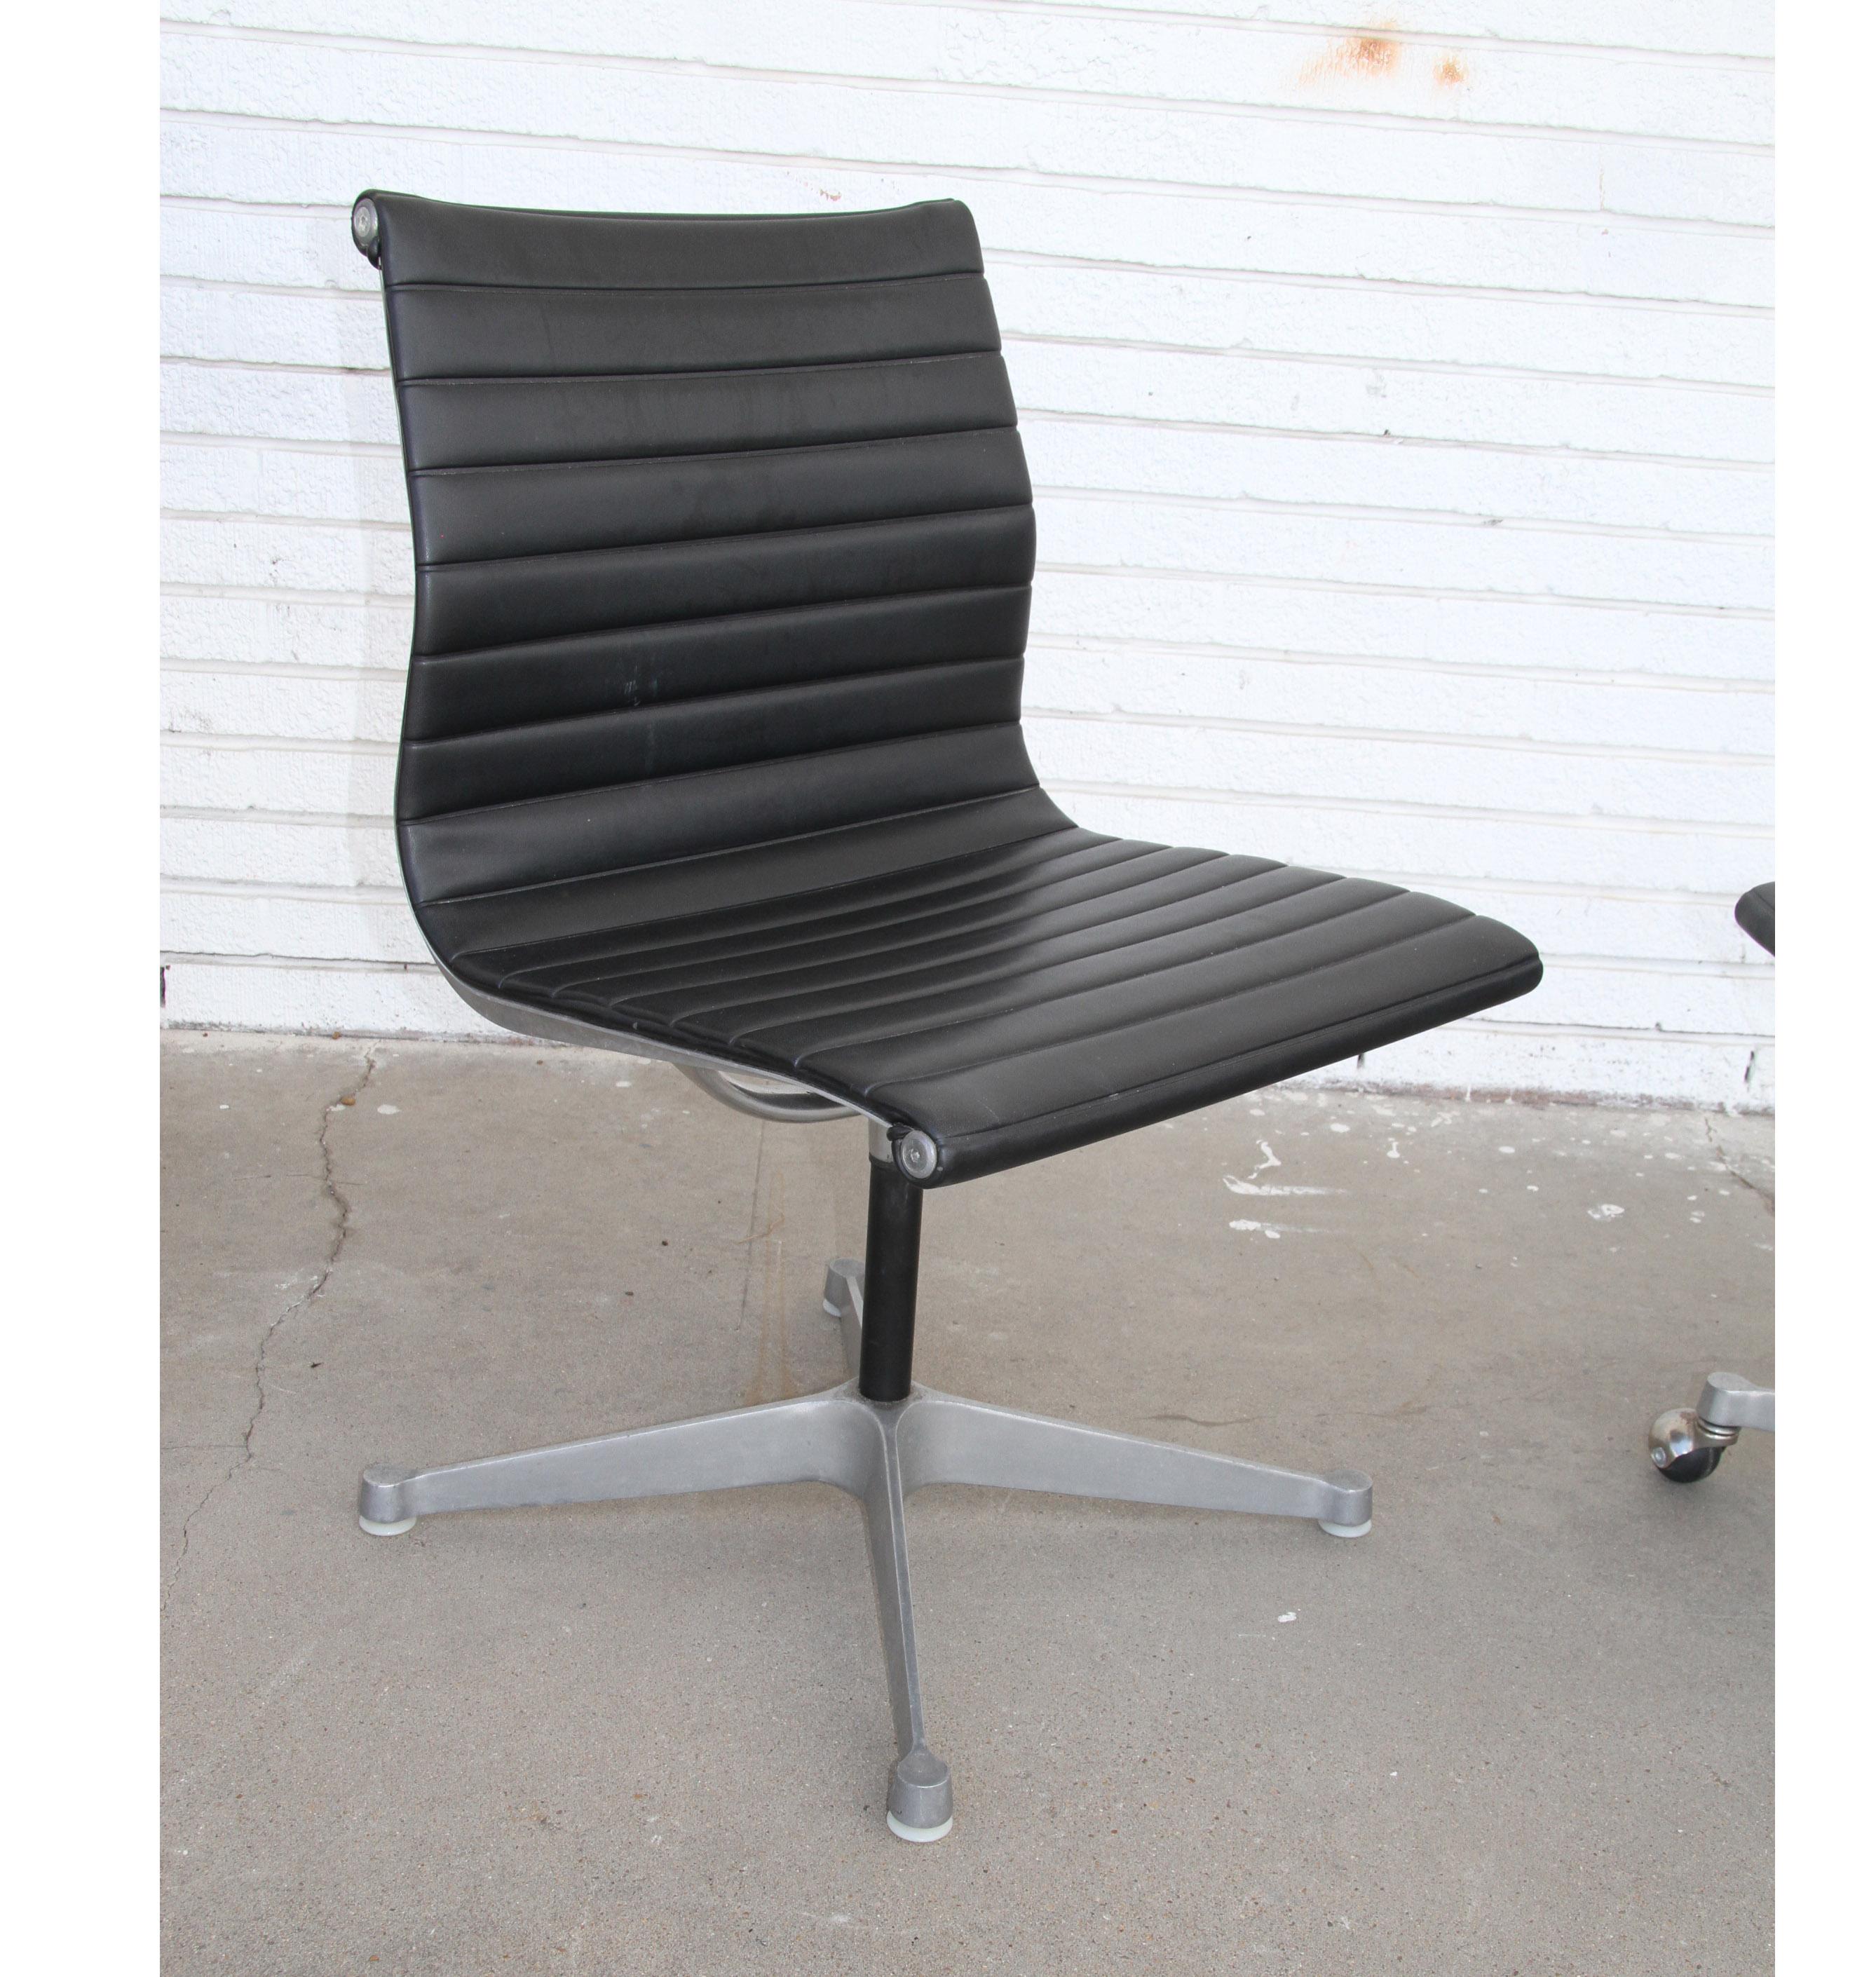 1 charles Eames Herman Miller Aluminum group chair
1970s

Charles and Ray Eames aluminum group side chair, EA330 office conference chair in black vinyl upholstery. The chair features a low-back with a lightweight aluminum frame and suspended